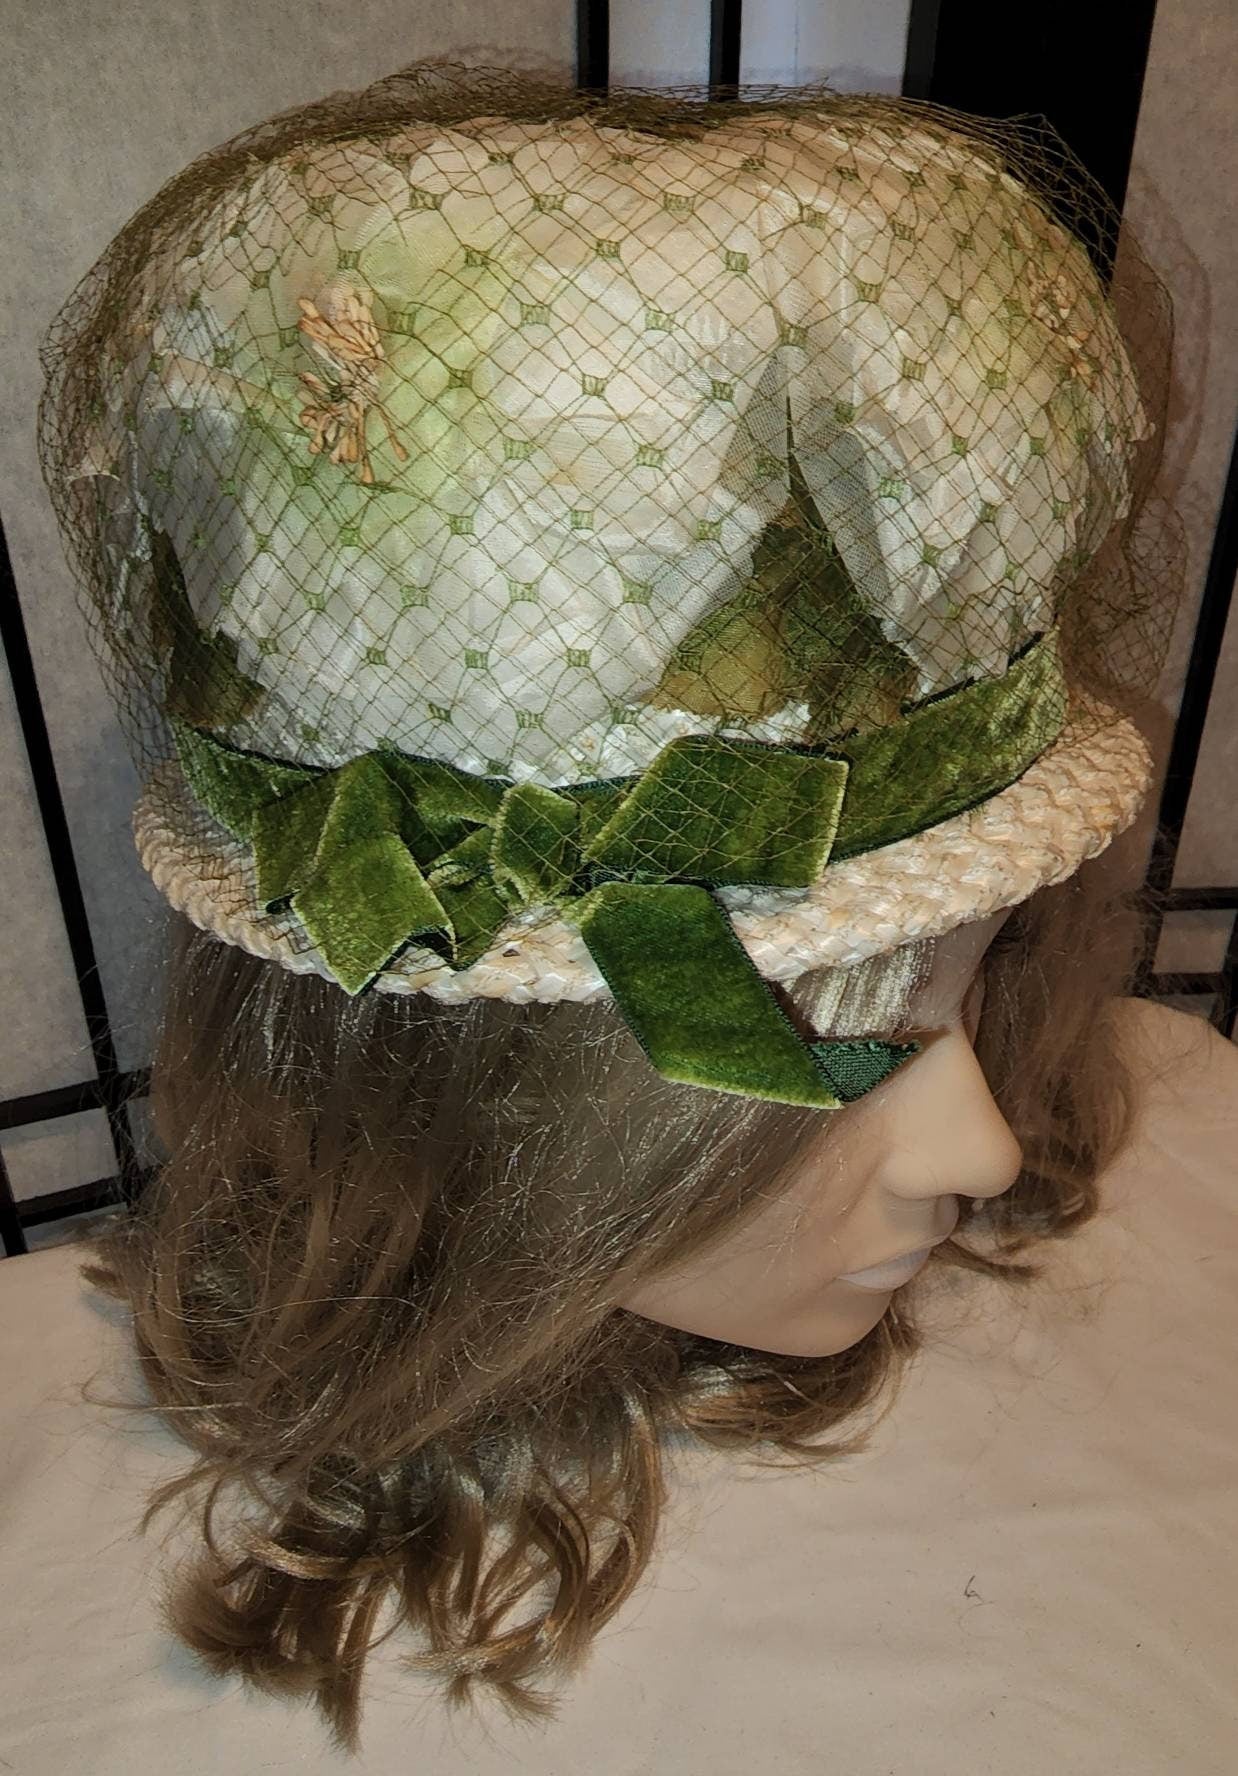 Vintage Bubble Hat 1960s High Round Cream Straw Floral Bubble Hat Green Net Veil White Flowers Leaves Velvet Ribbon Rockabilly Mod 21 in.